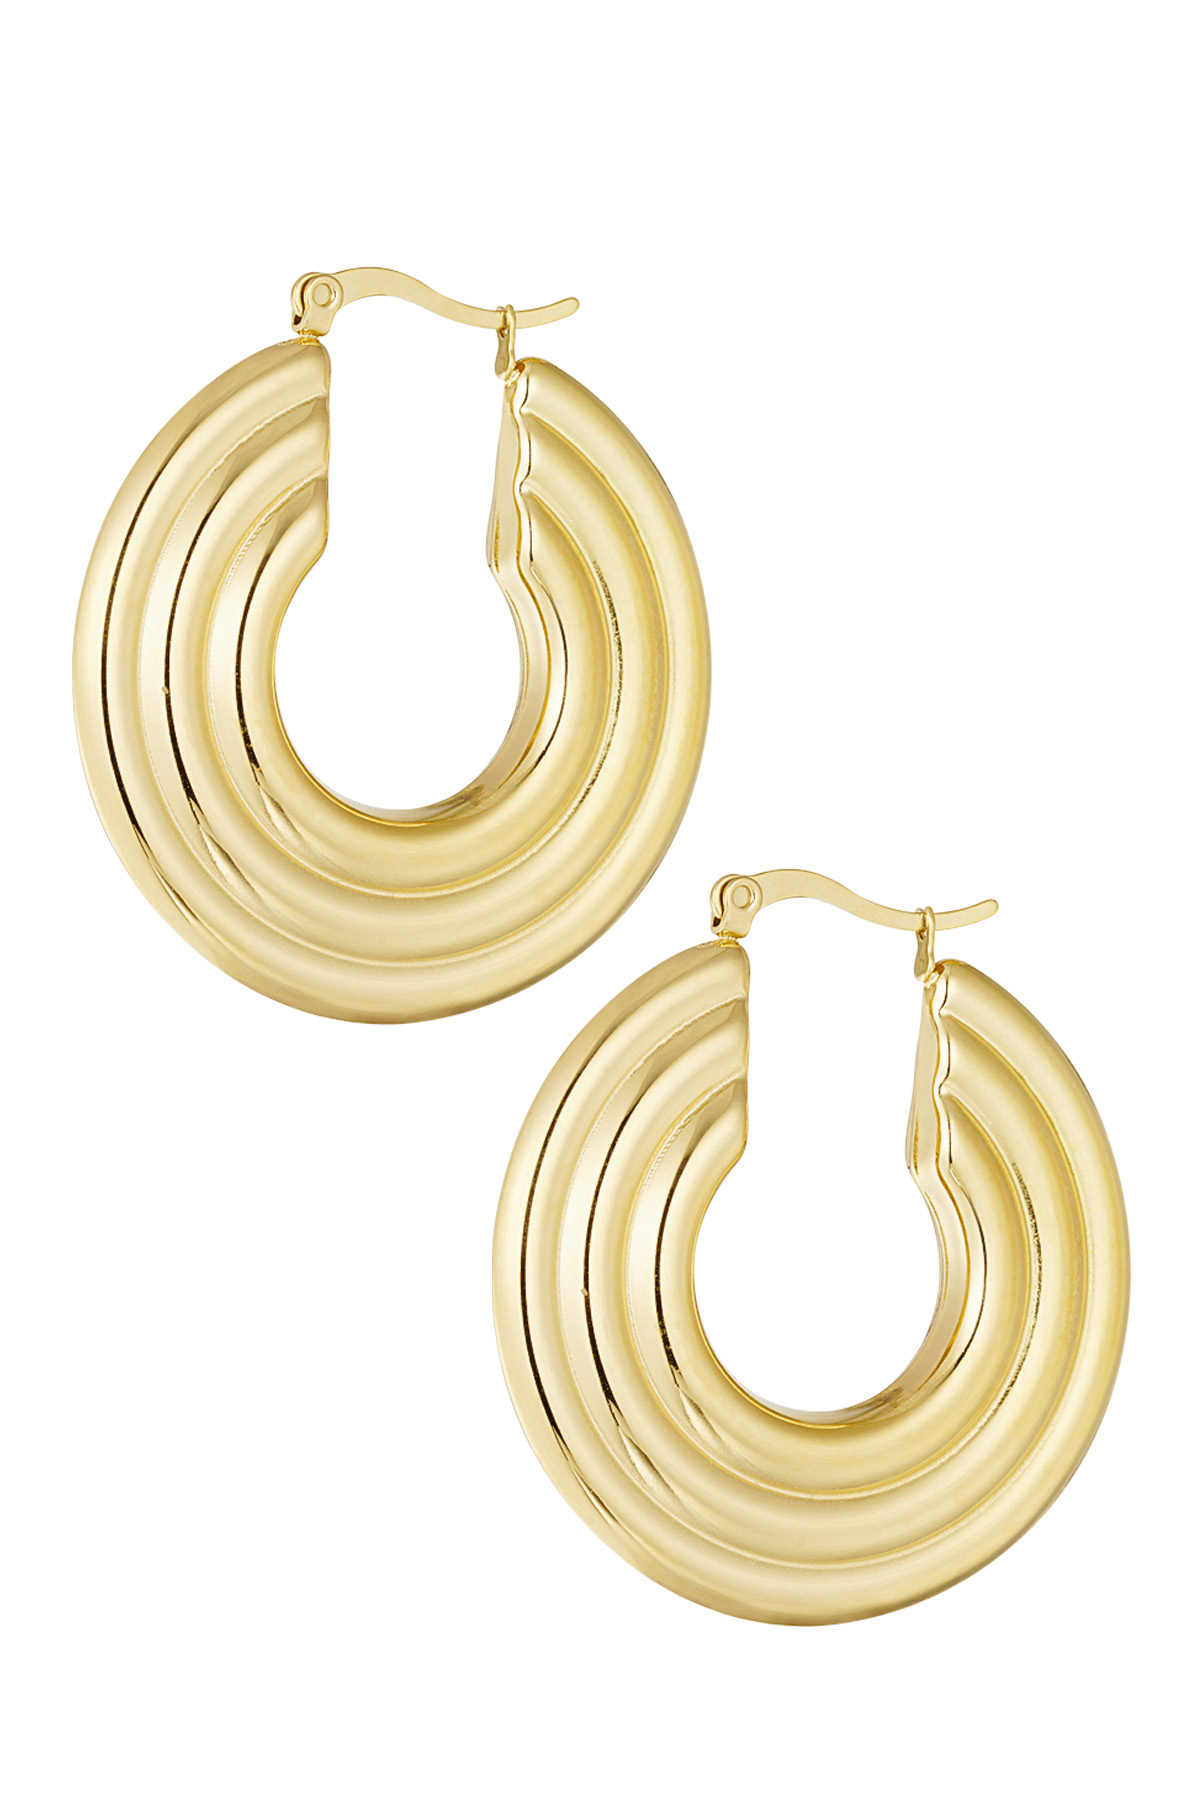 Round earrings with pattern - gold 